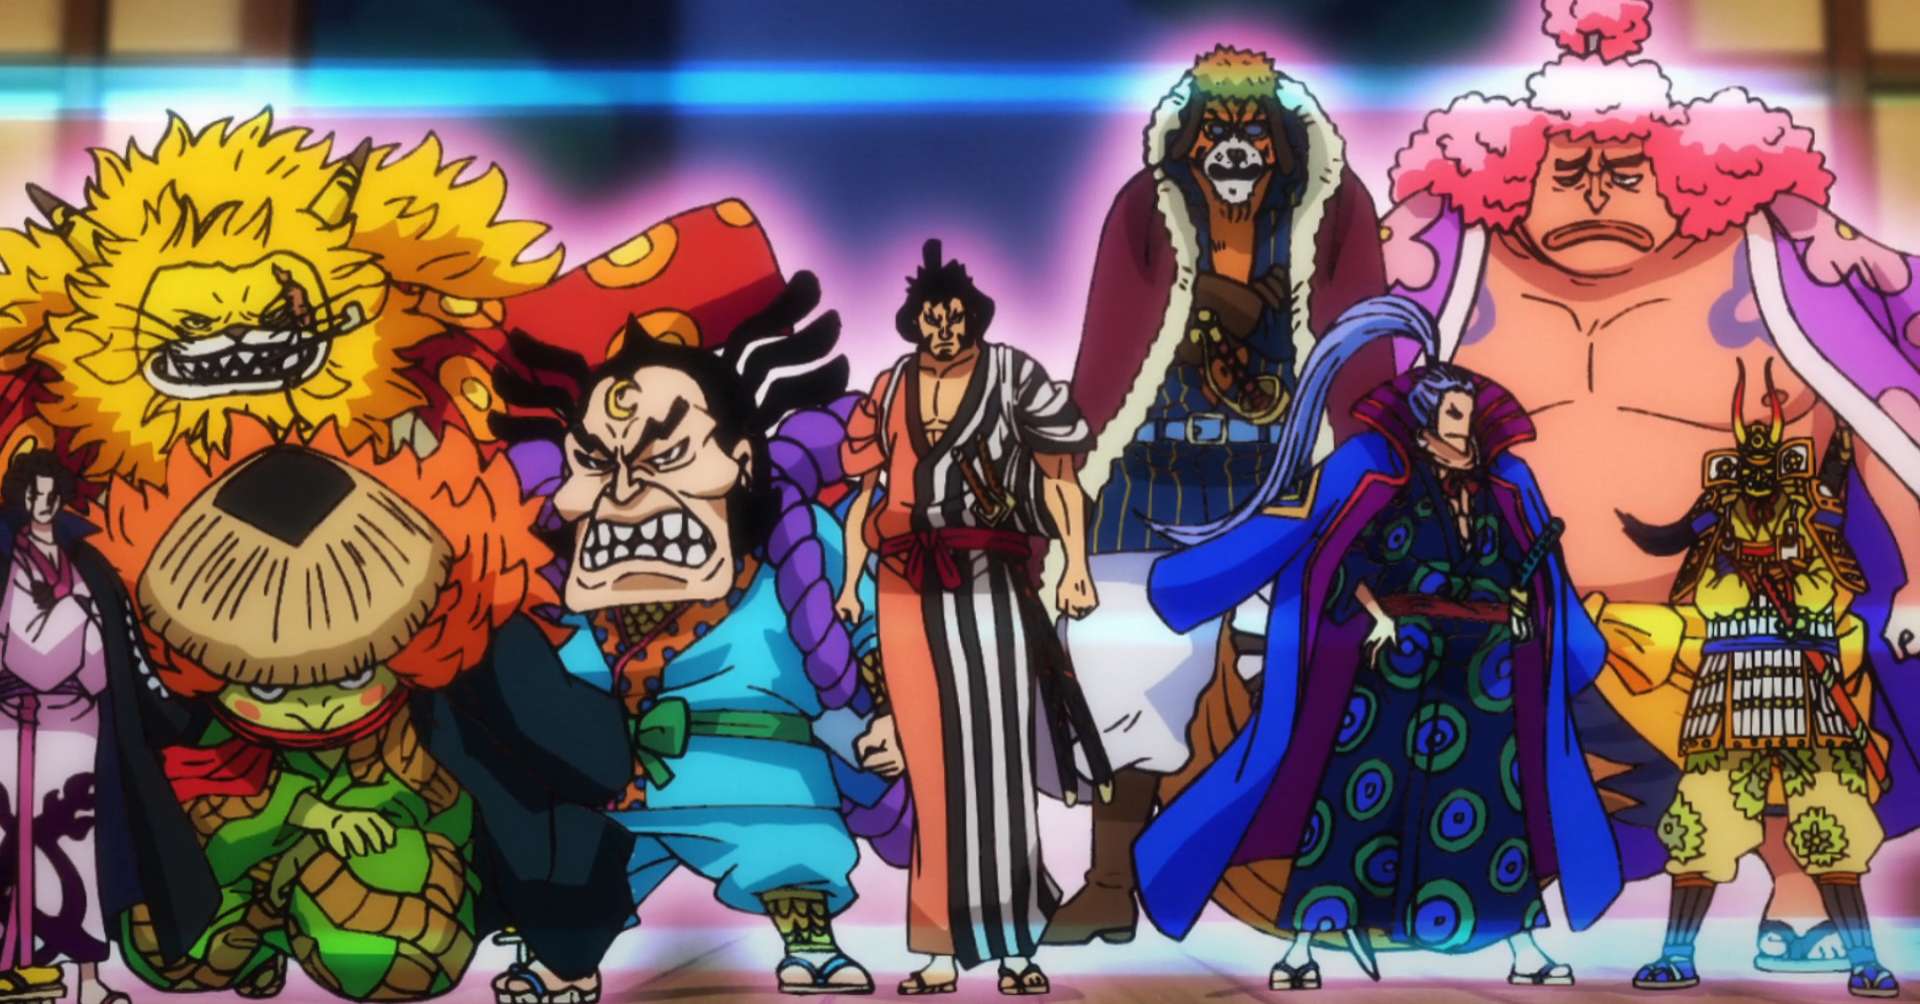 One Piece Episode 1027: Release Date, Spoilers, and Other Details